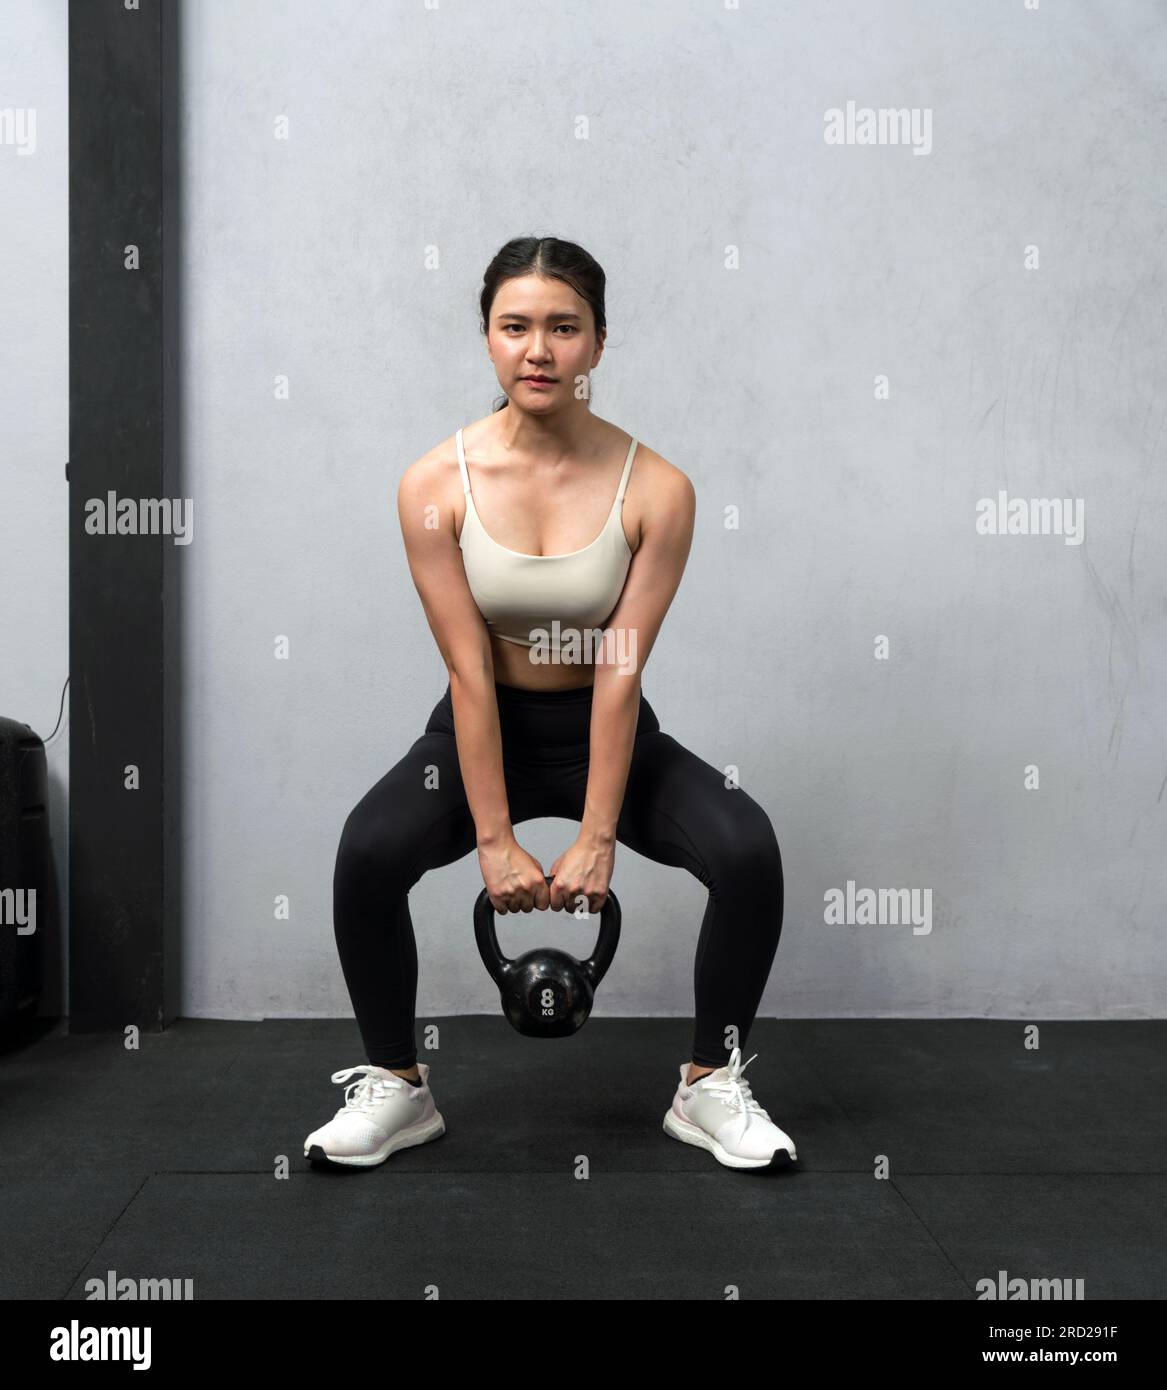 Young asian woman performs kettlebell squats in a well-equipped gym, her athletic form an epitome of balanced strength and endurance. She grips a heav Stock Photo